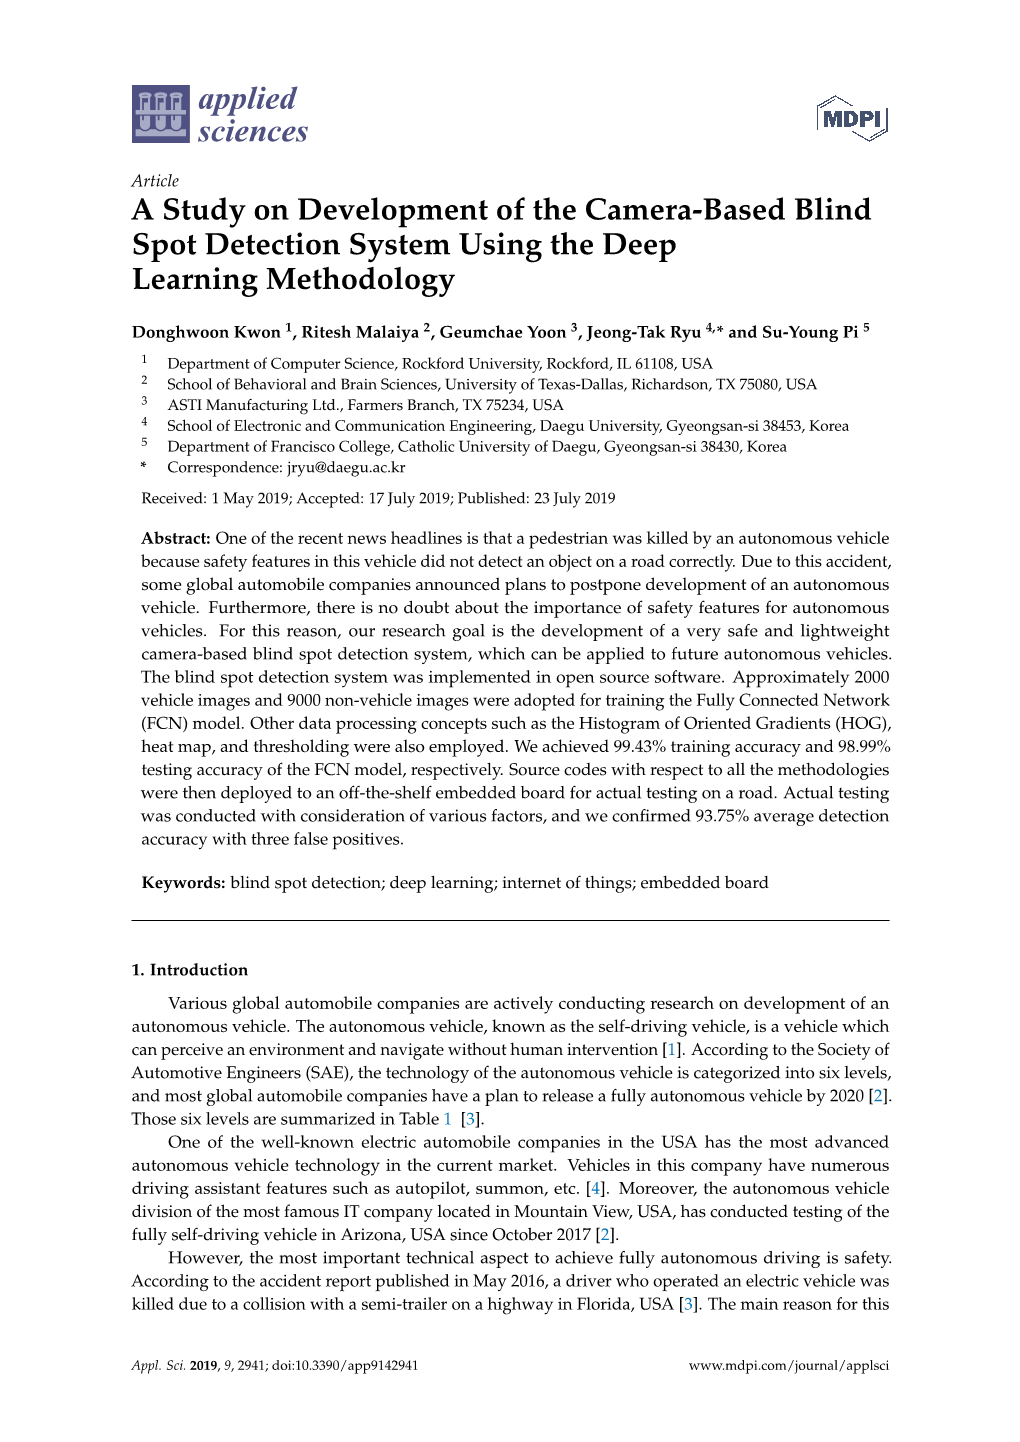 A Study on Development of the Camera-Based Blind Spot Detection System Using the Deep Learning Methodology